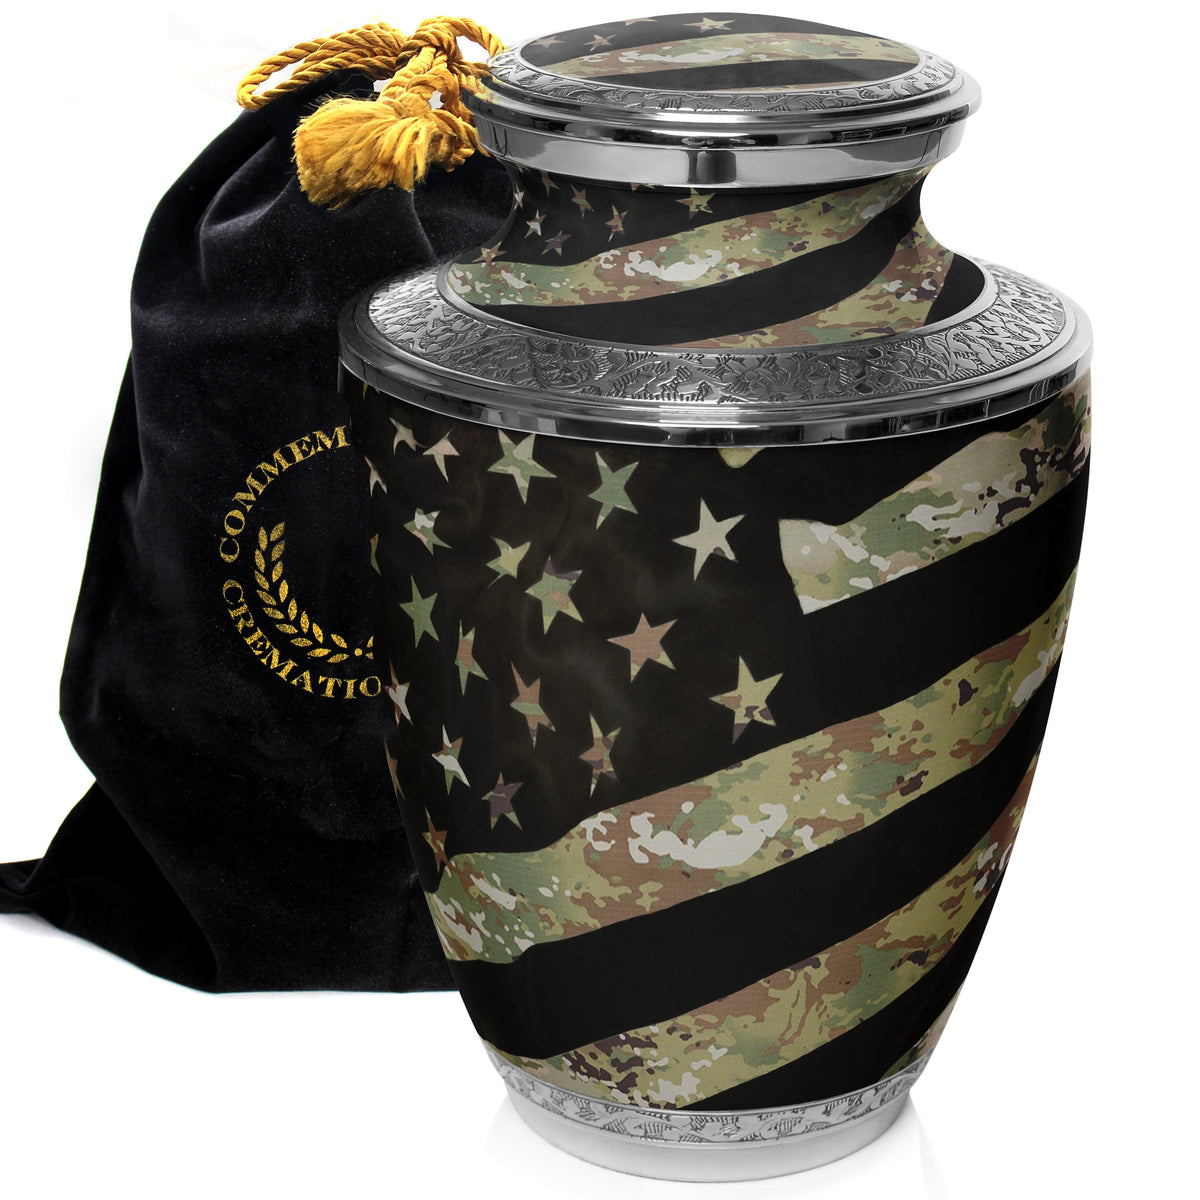 Commemorative Cremation Urns Home &amp; Garden Army OCP Flag Military Cremation Urn